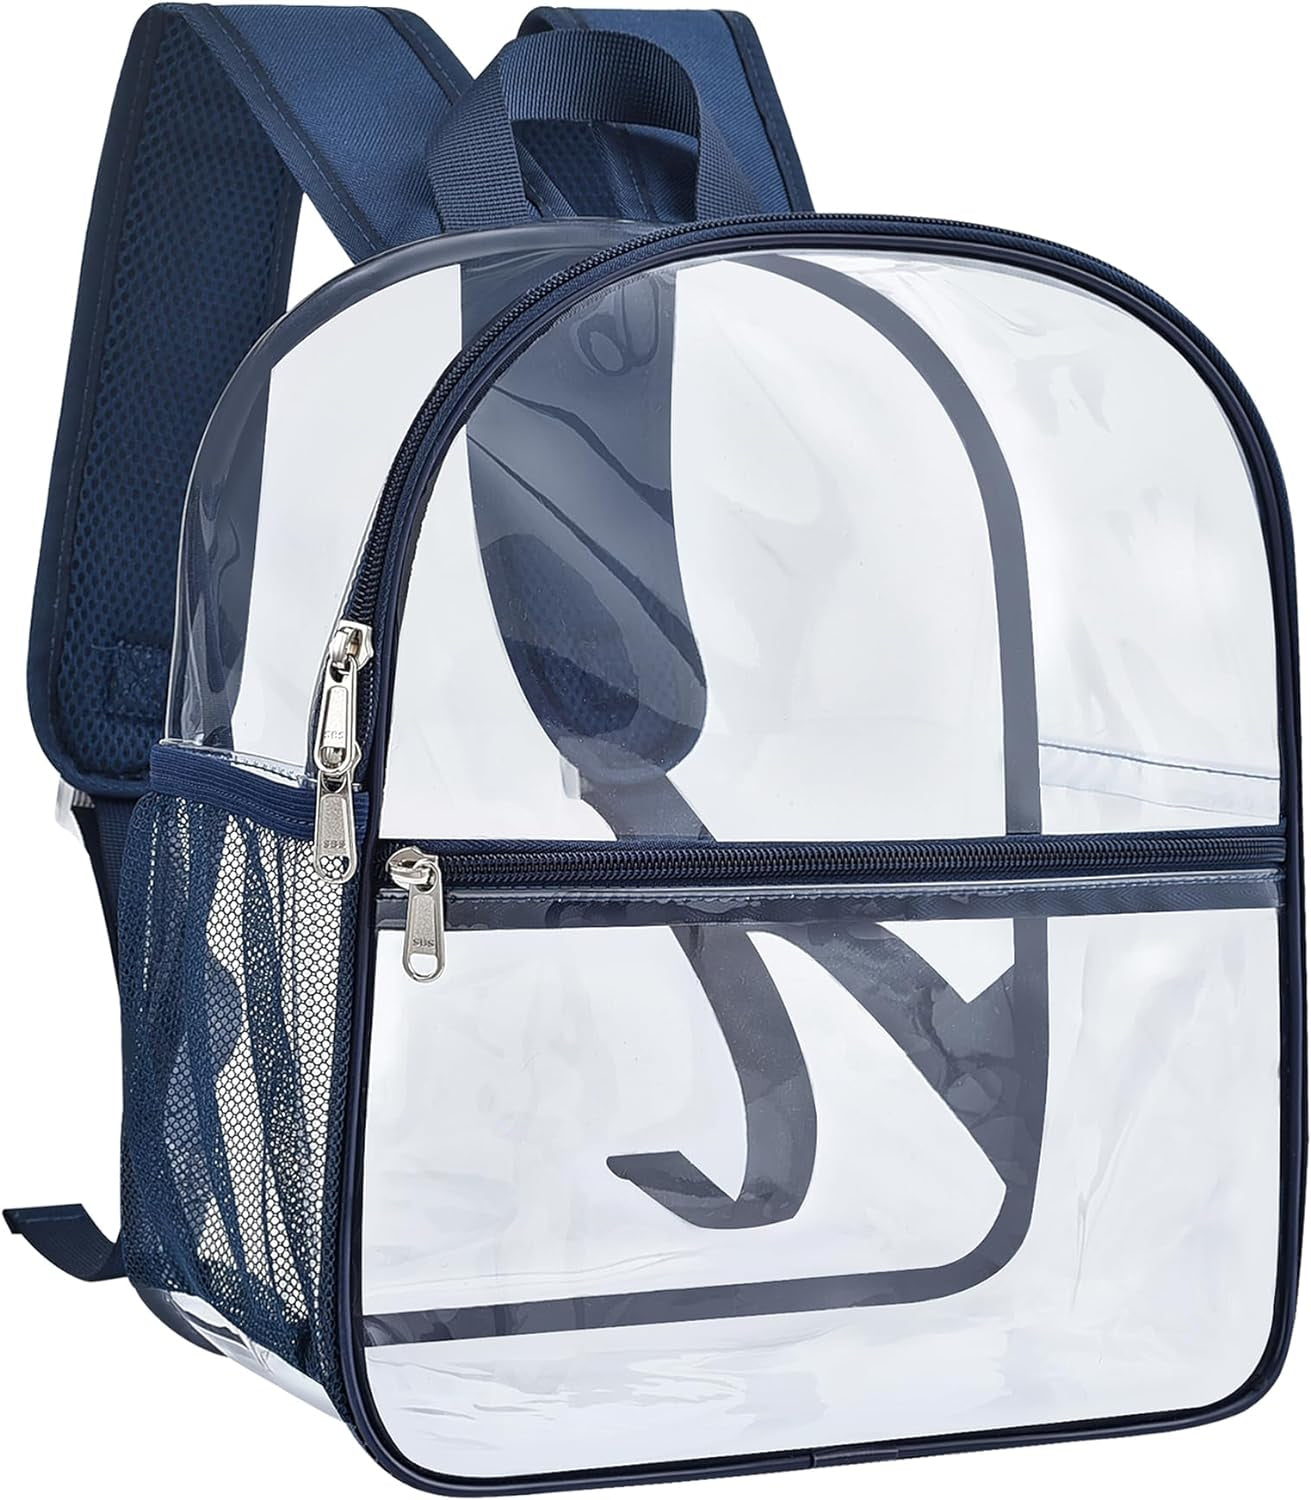 Clear Backpack Stadium Approved 12×12×6 with Reinforced and Wider Shoulder Straps, Small Clear Bag for Schools, Concerts, Work, Festivals and Sporting Events - Black